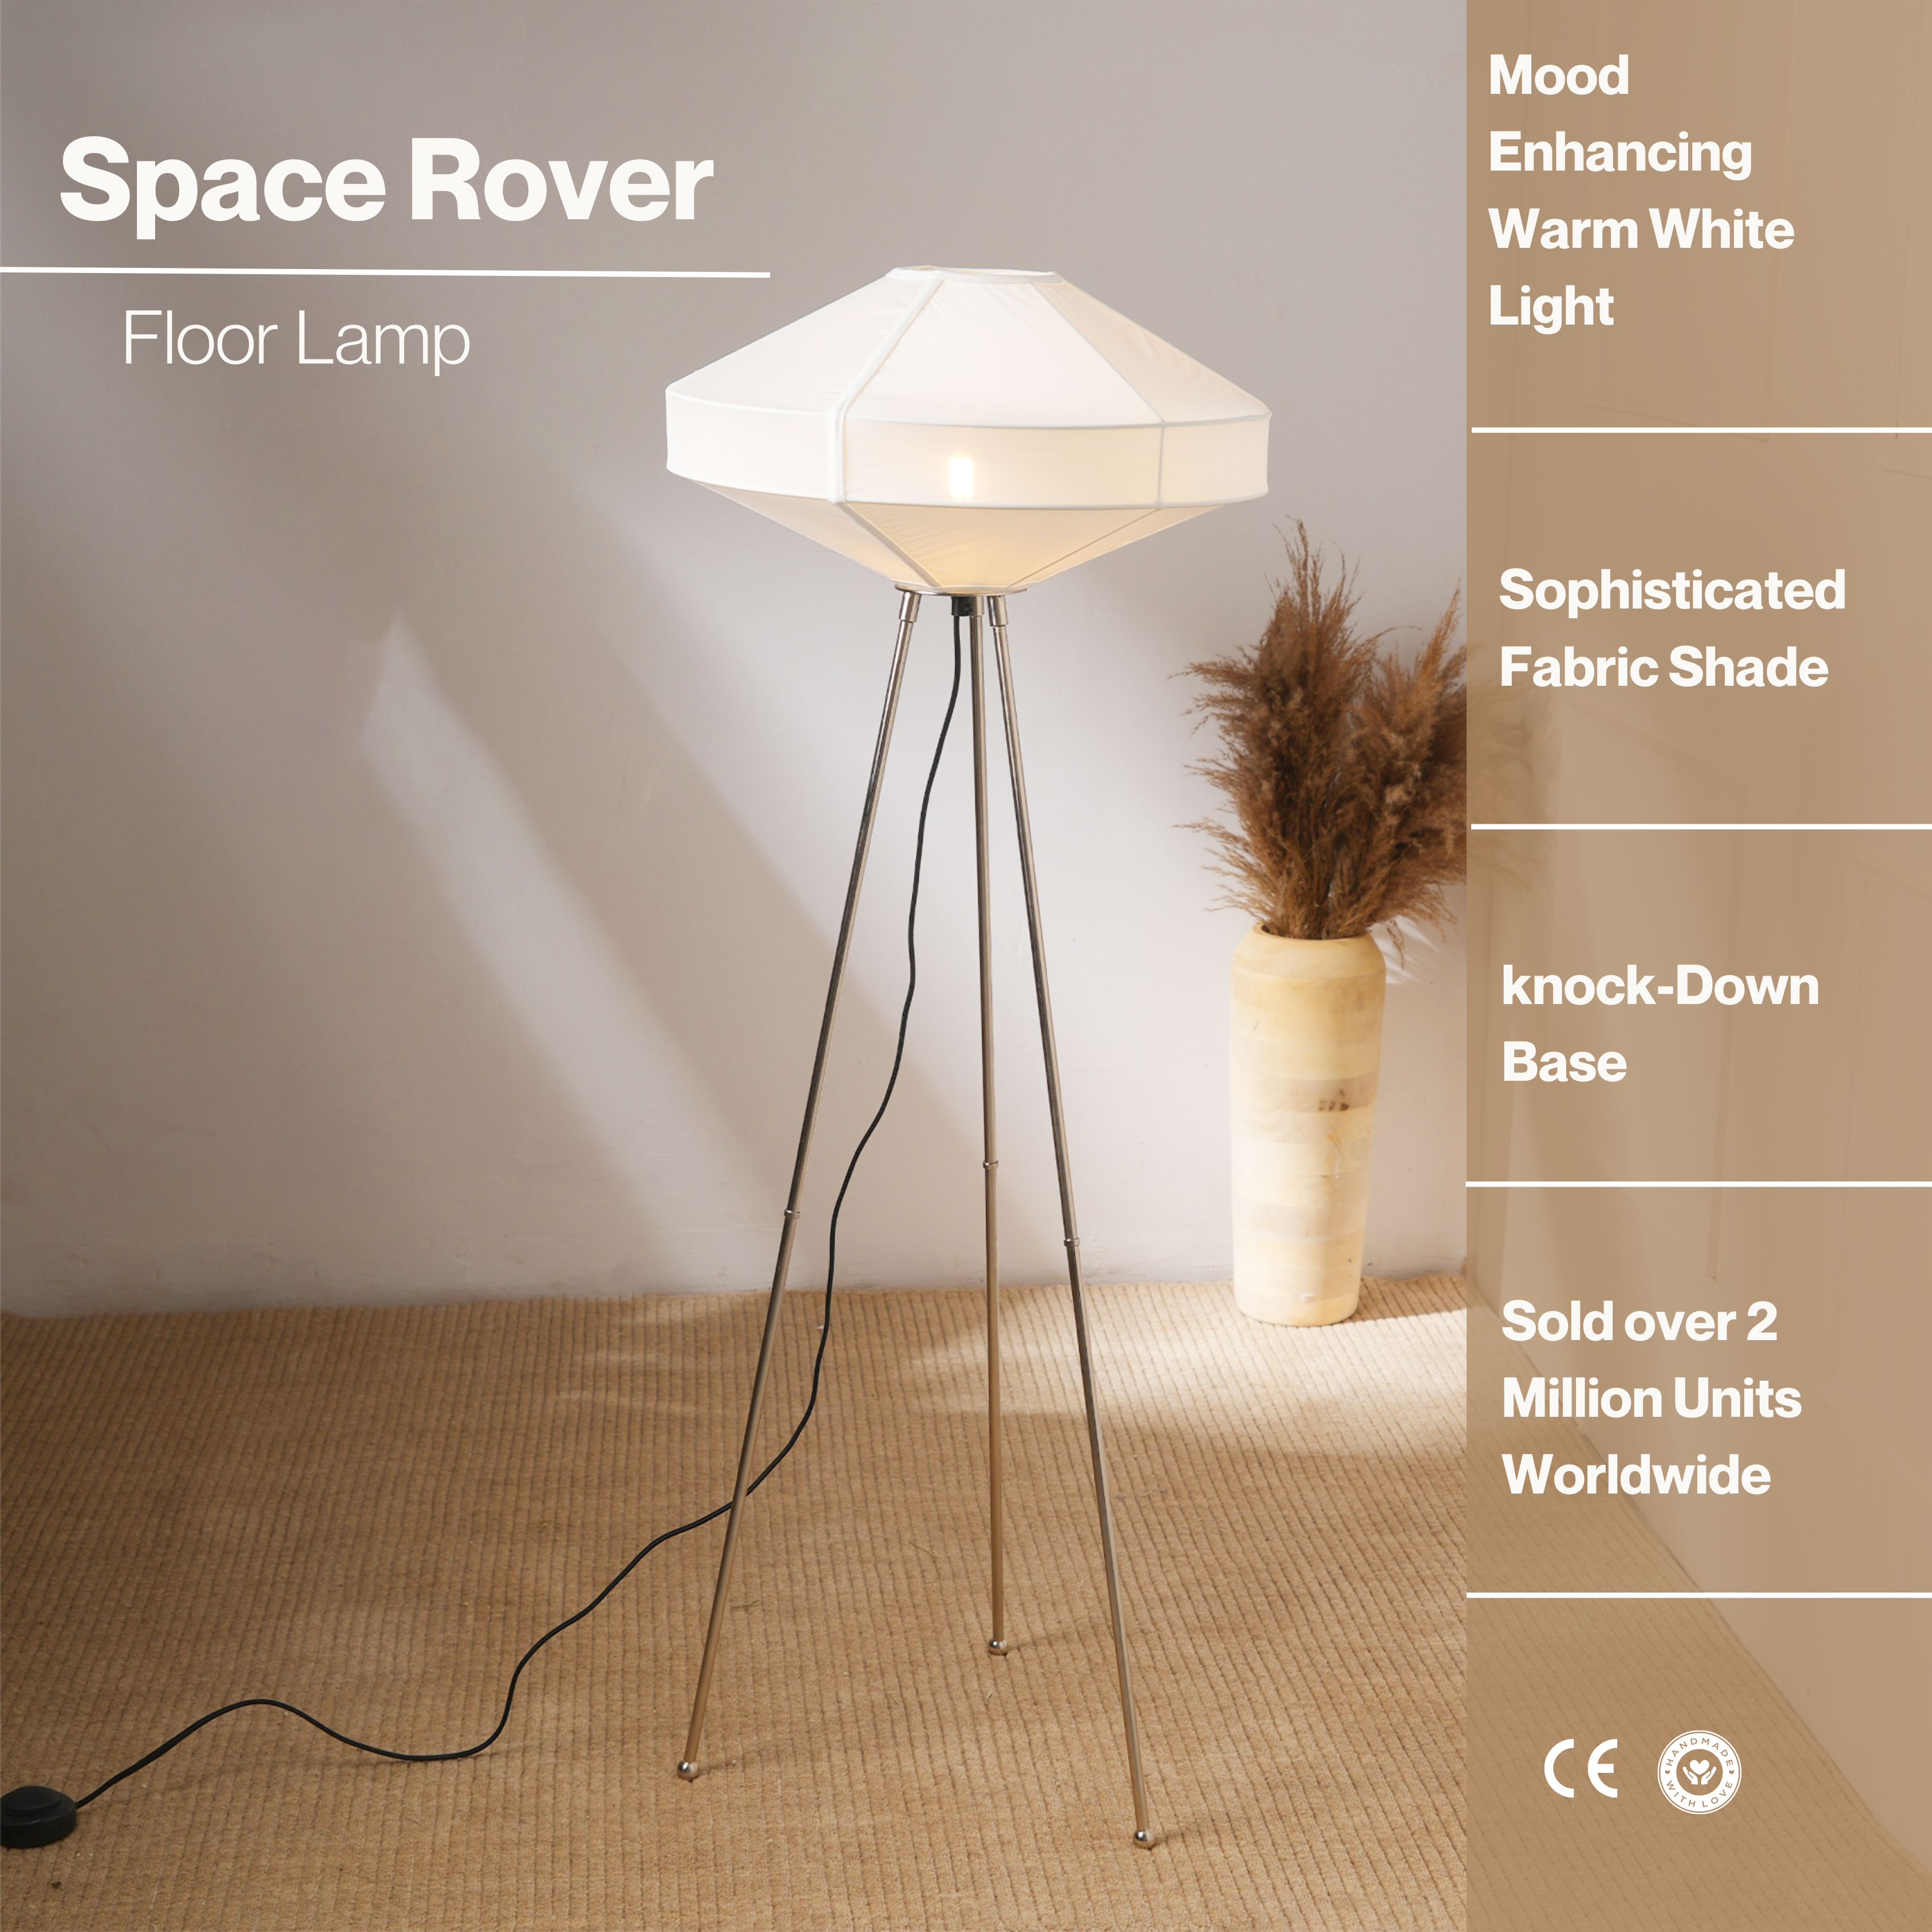 Space Rover Floor Lamp - Tripod Floor Light, Nickle Base and Elegant Fabric Shade Tripod Standing Lamp